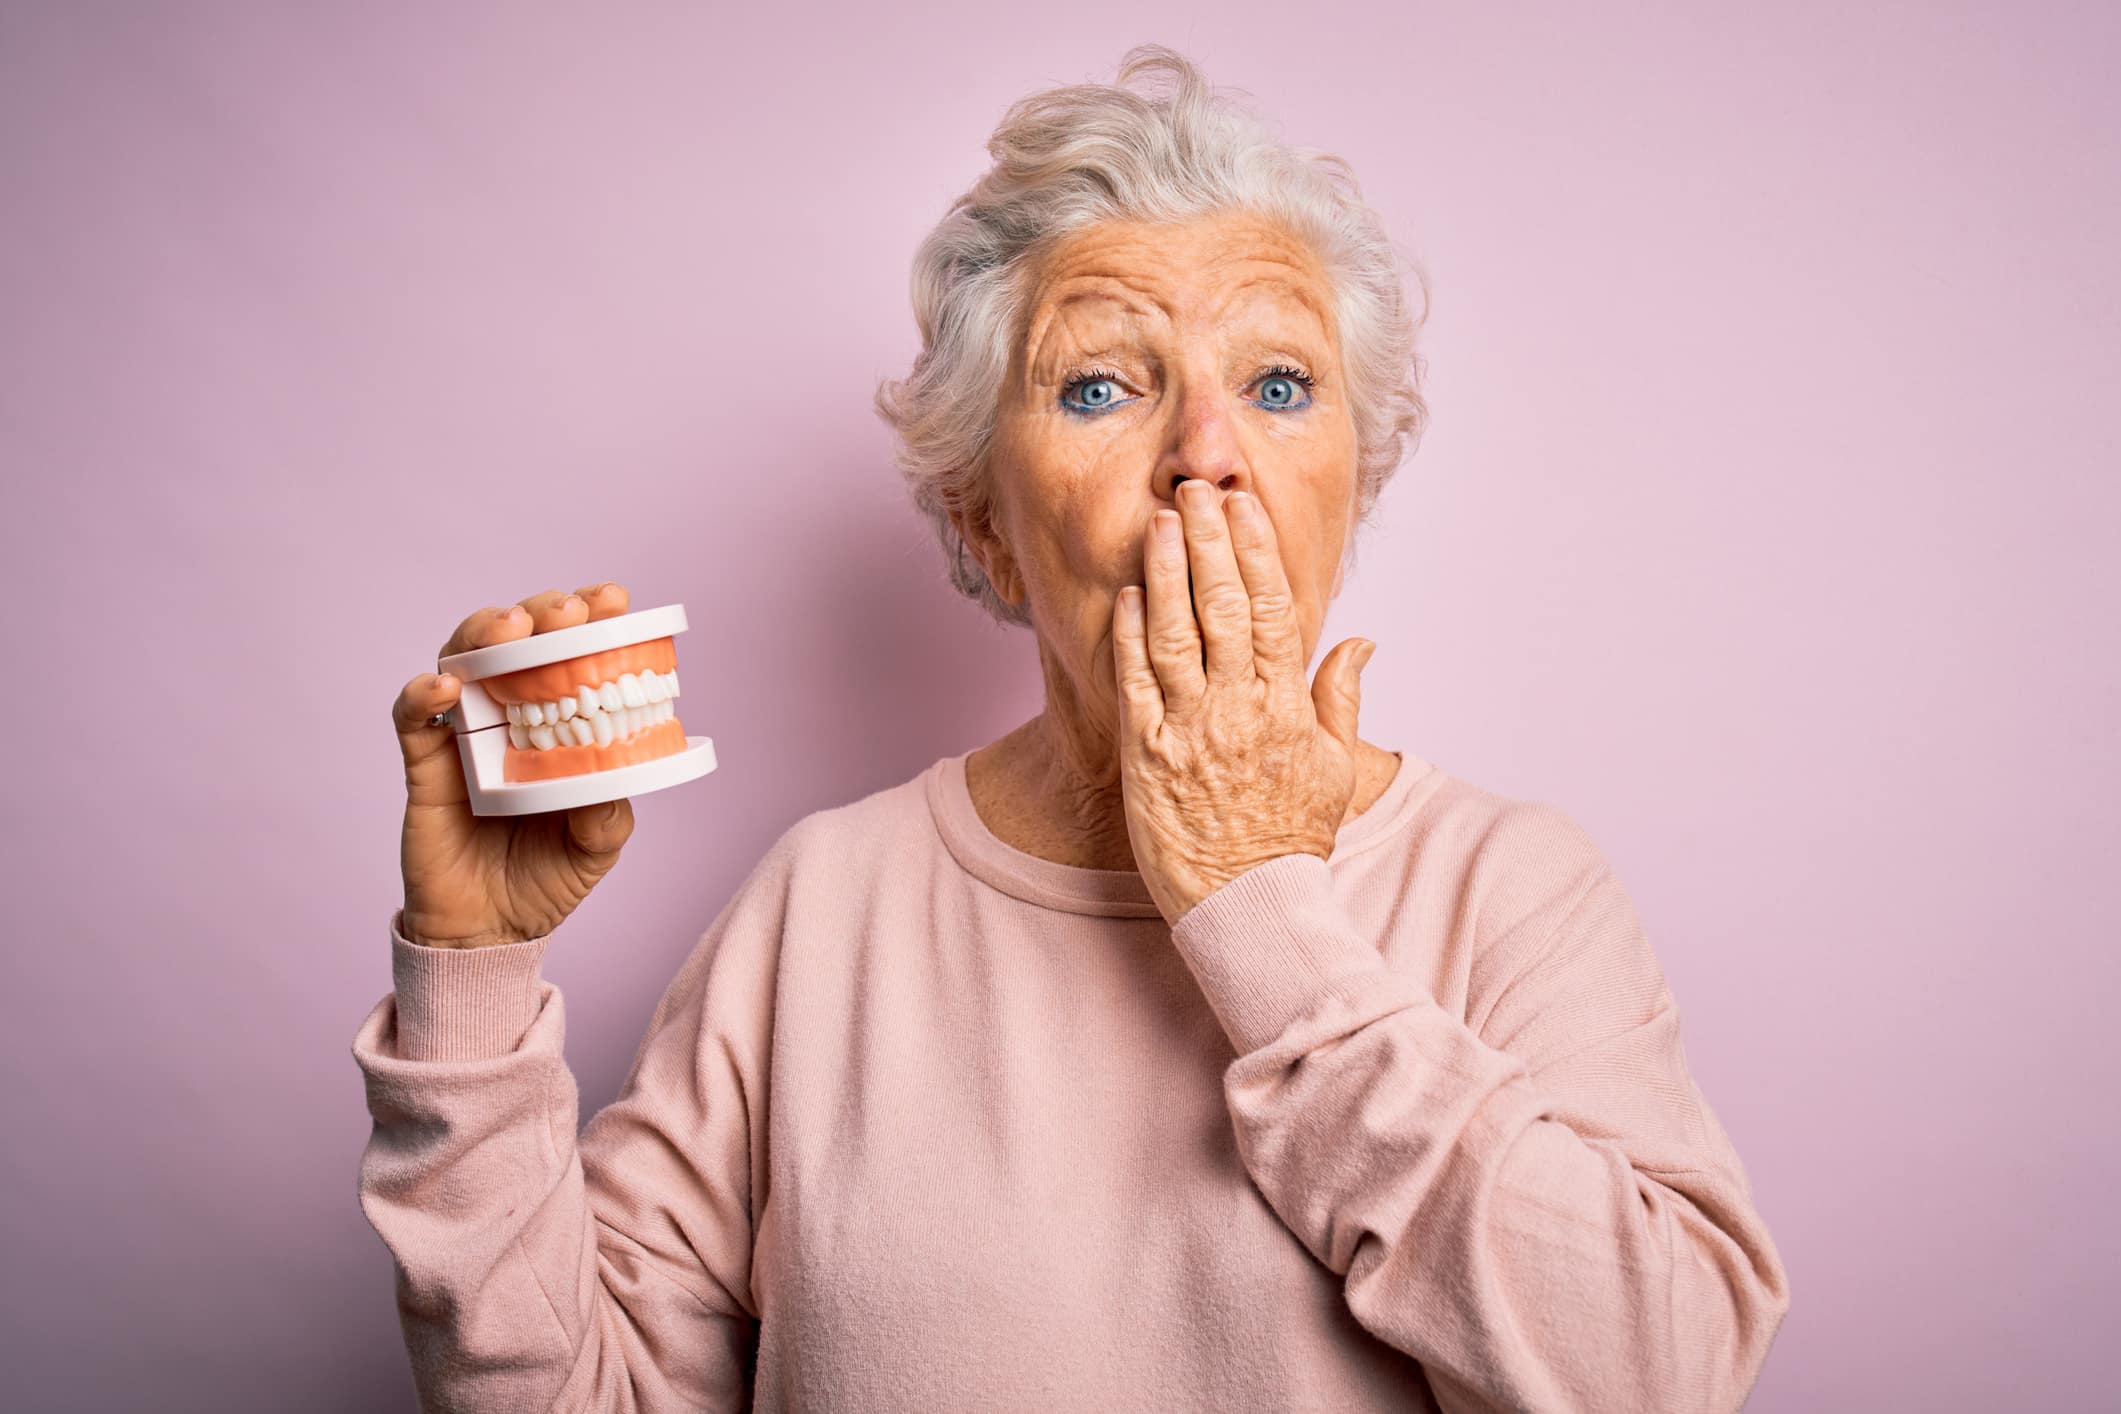 A woman holding a pair of dentures and covering her mouth in front of a pink background.